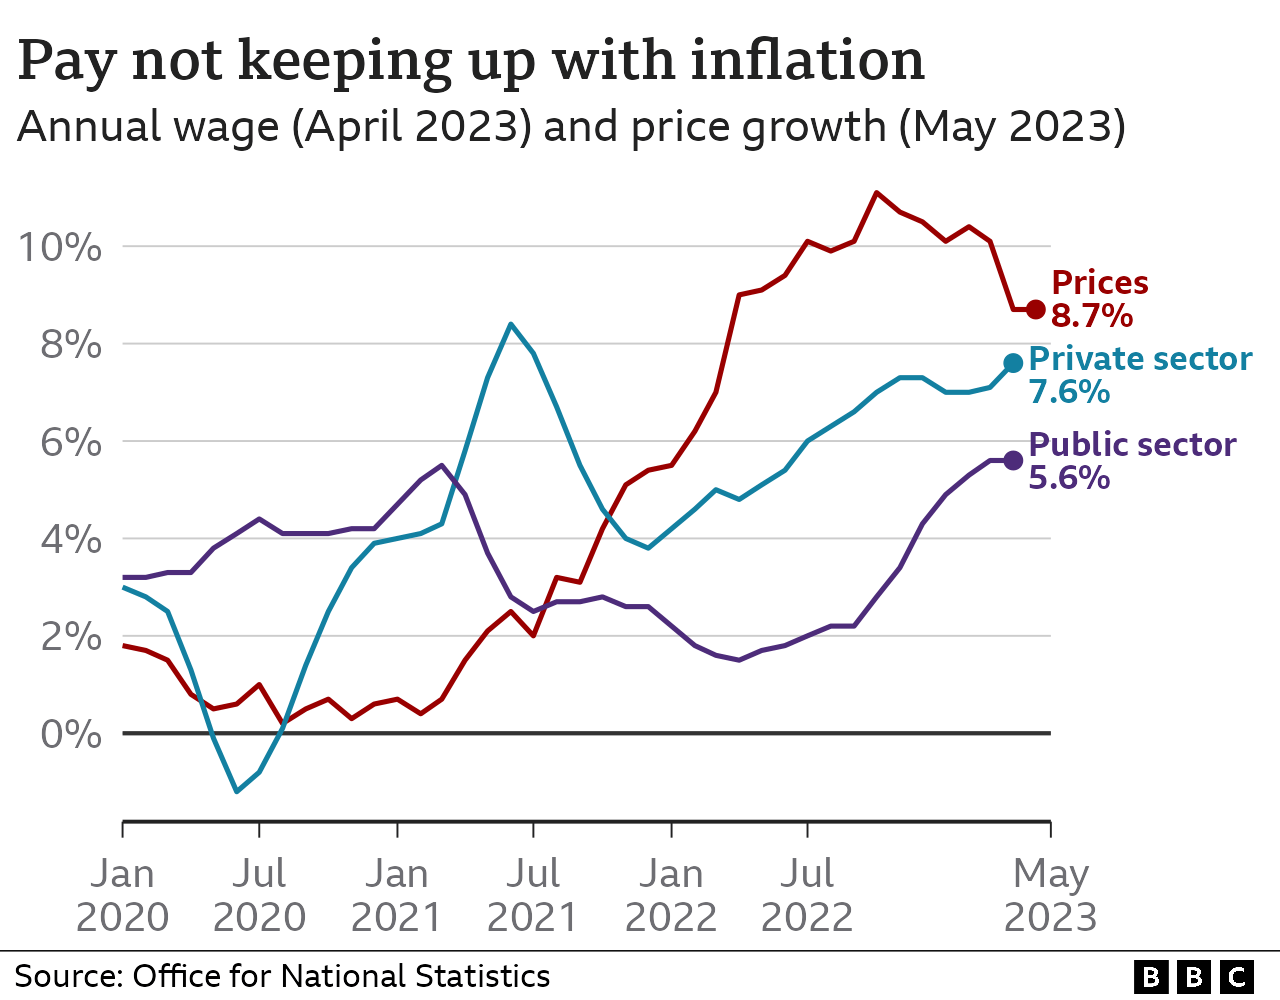 Line chart showing inflation at 8.7%, private wage rise at 7.6% and public sector wage rise at 5.6%.